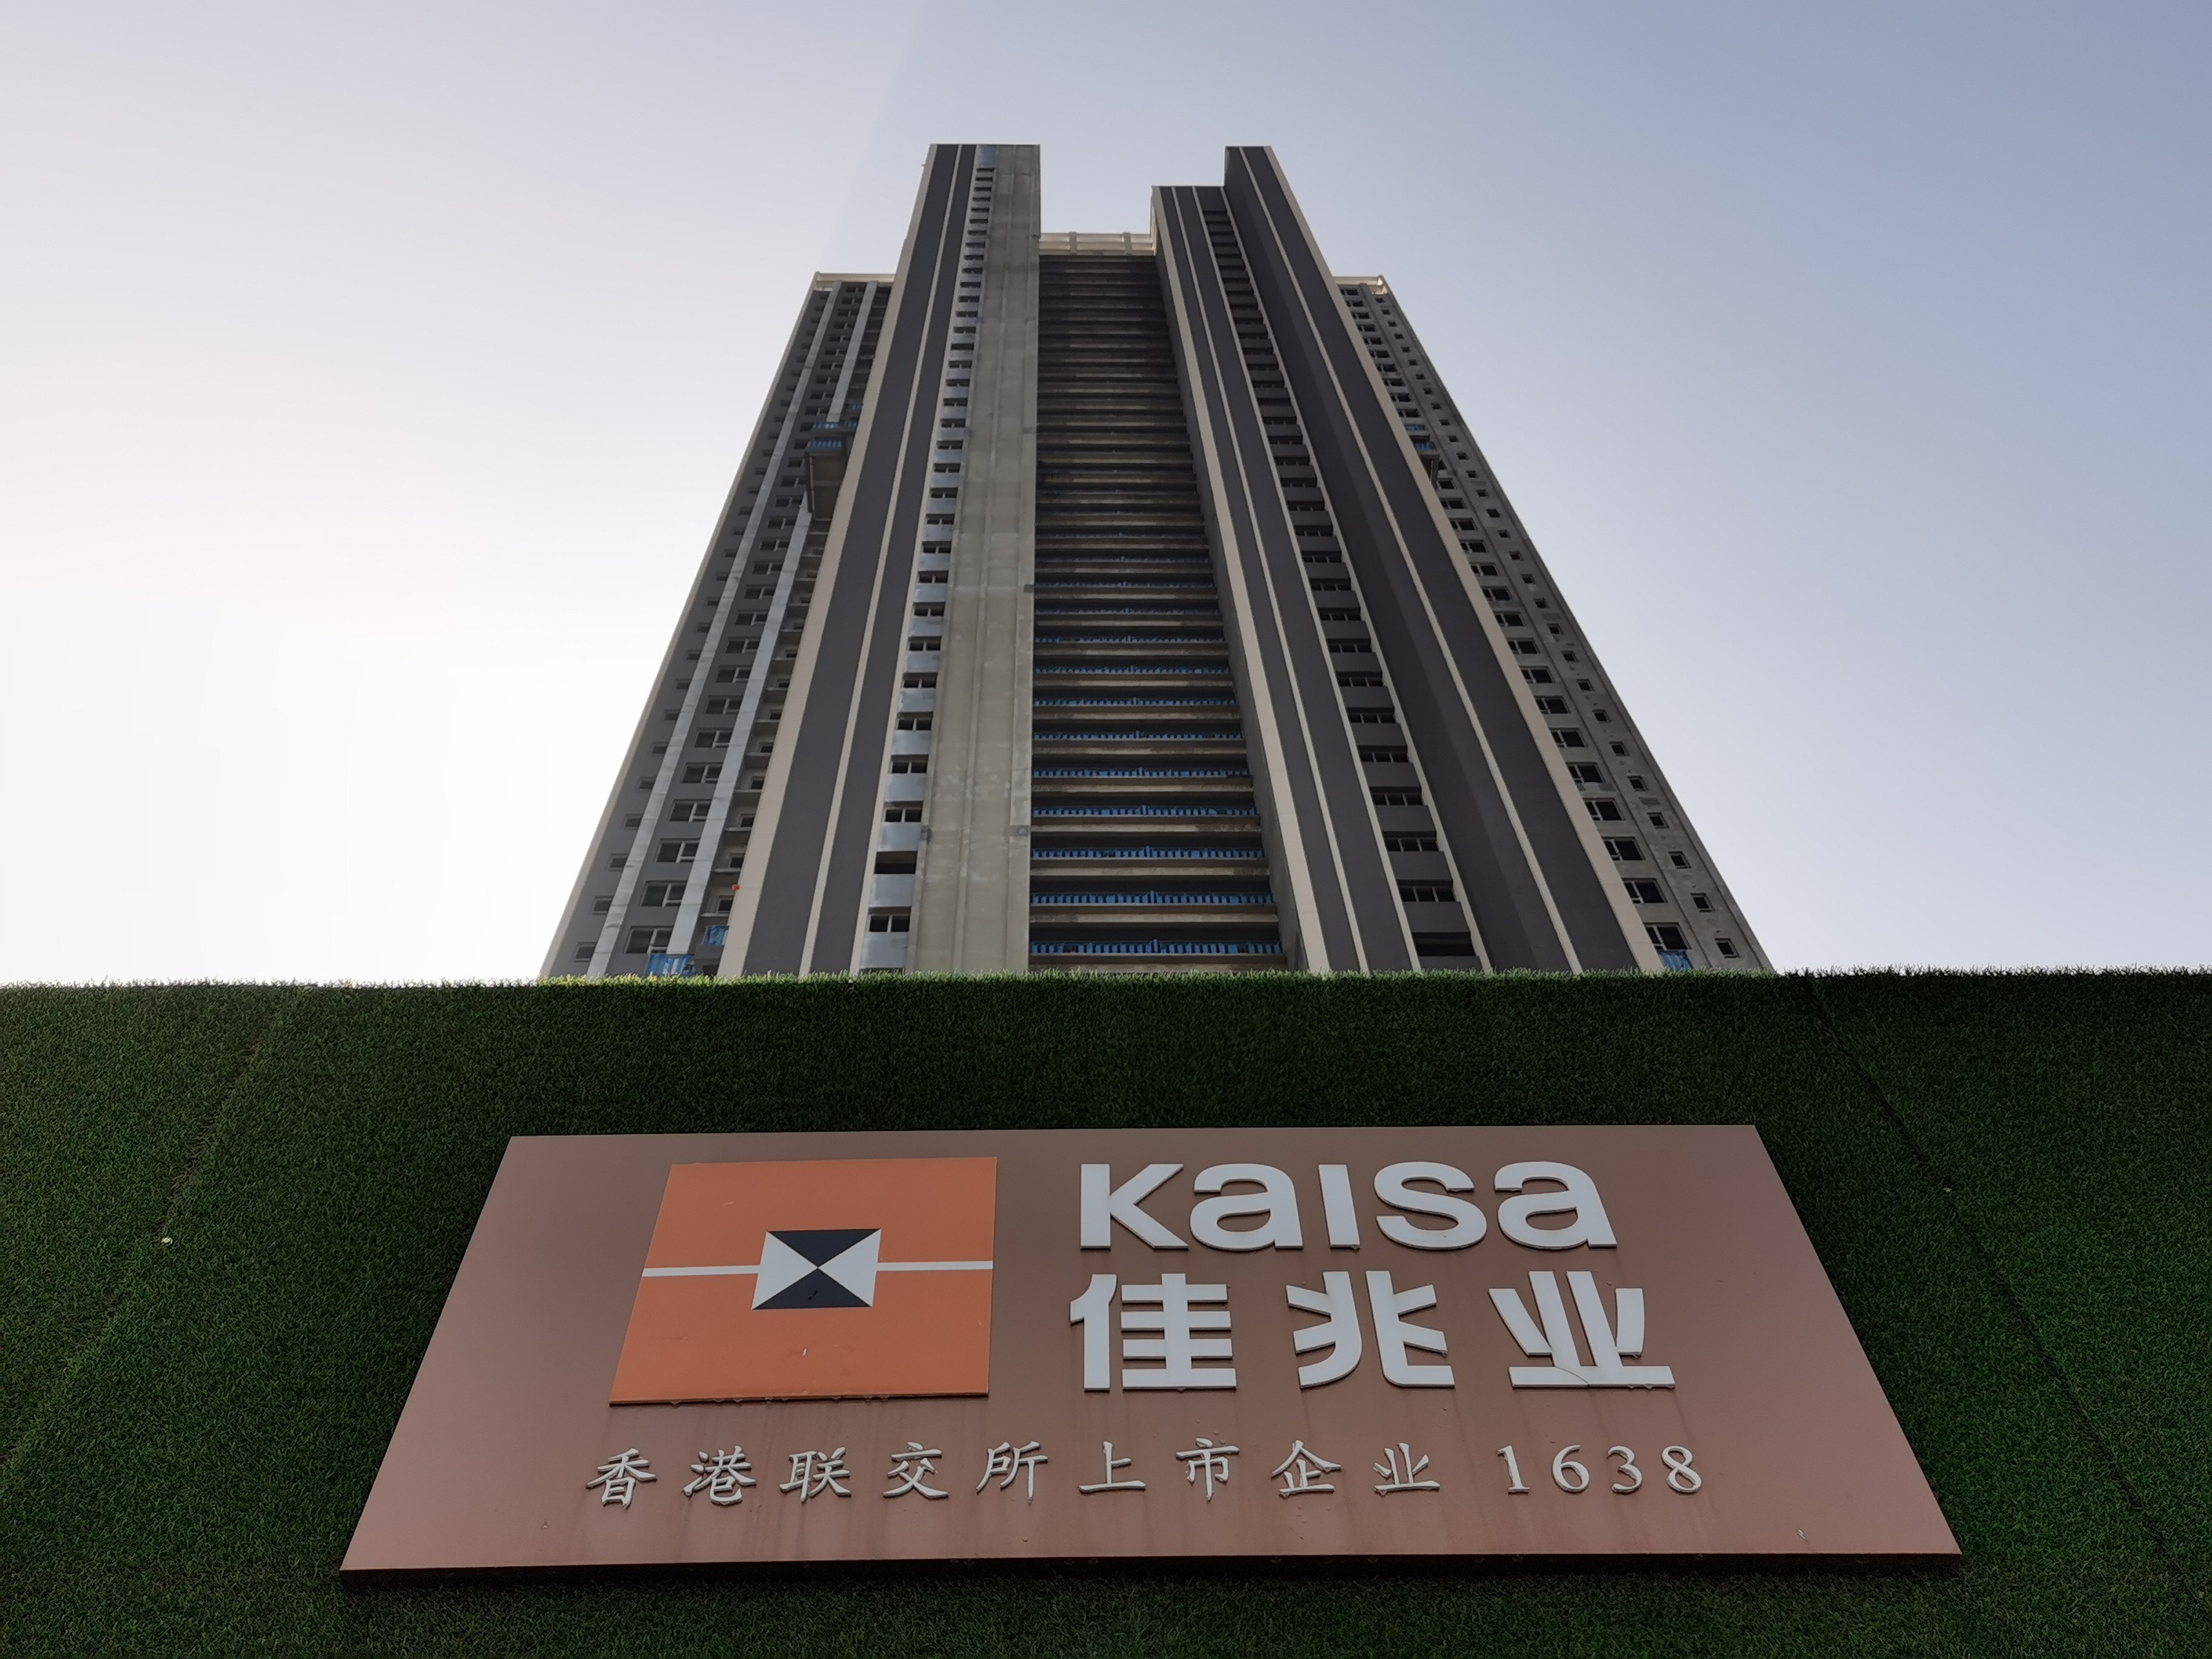 The judge asked Kaisa to submit an update on its restructuring progress before the next hearing on a date to be decided later. Photo: VCG